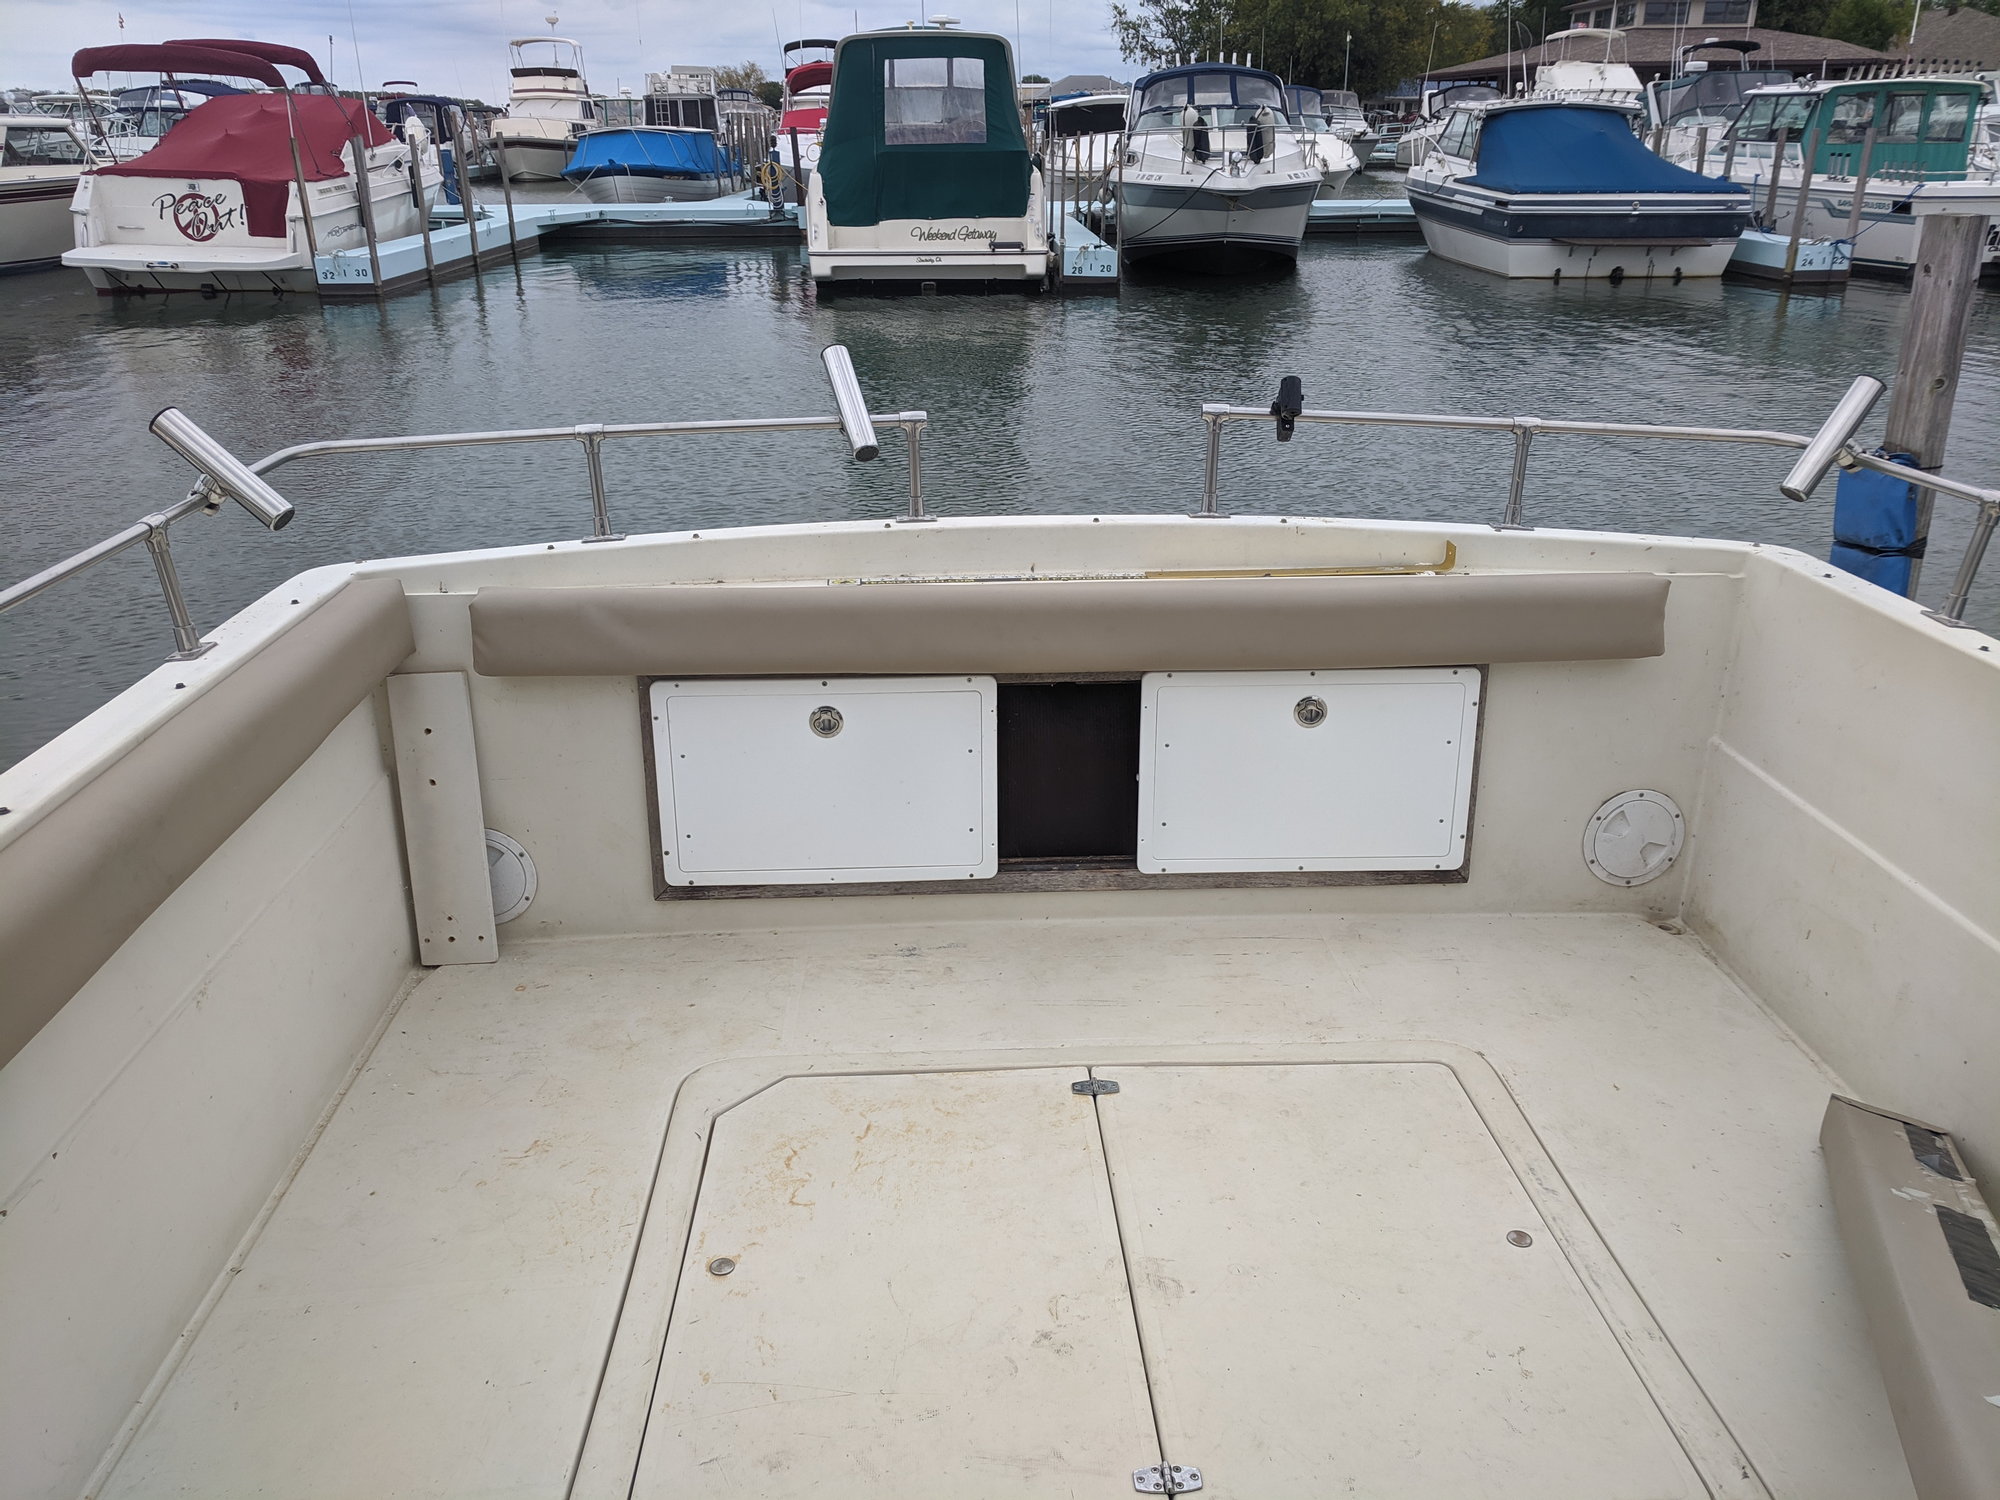 what are some of the DIY ideas on your boat. - Page 42 - The Hull